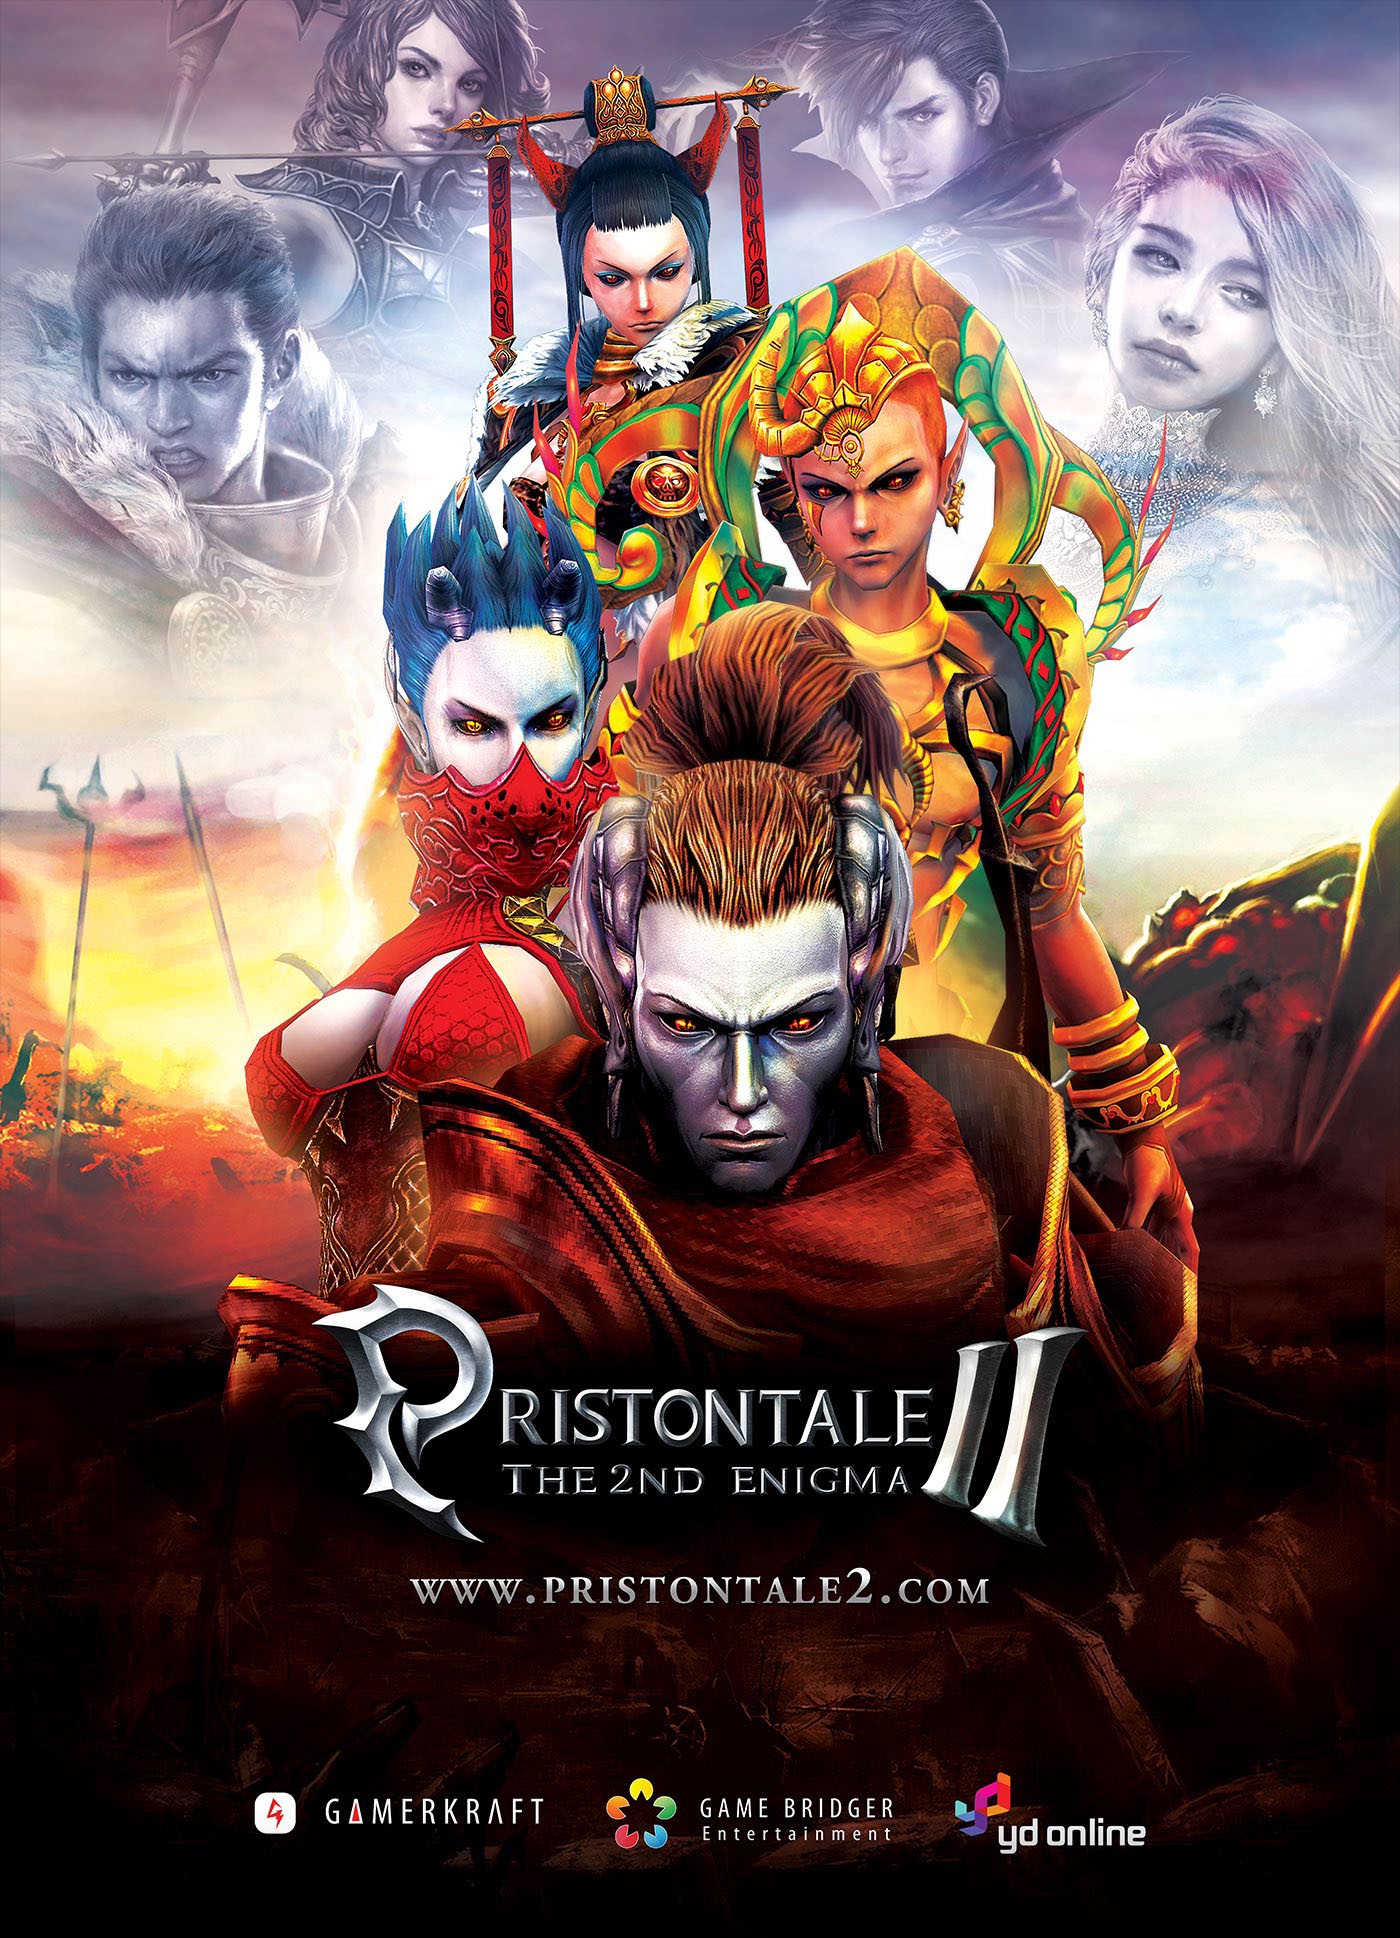 priston tale 2 mmorpg free-to-play Online Games fantasy poster